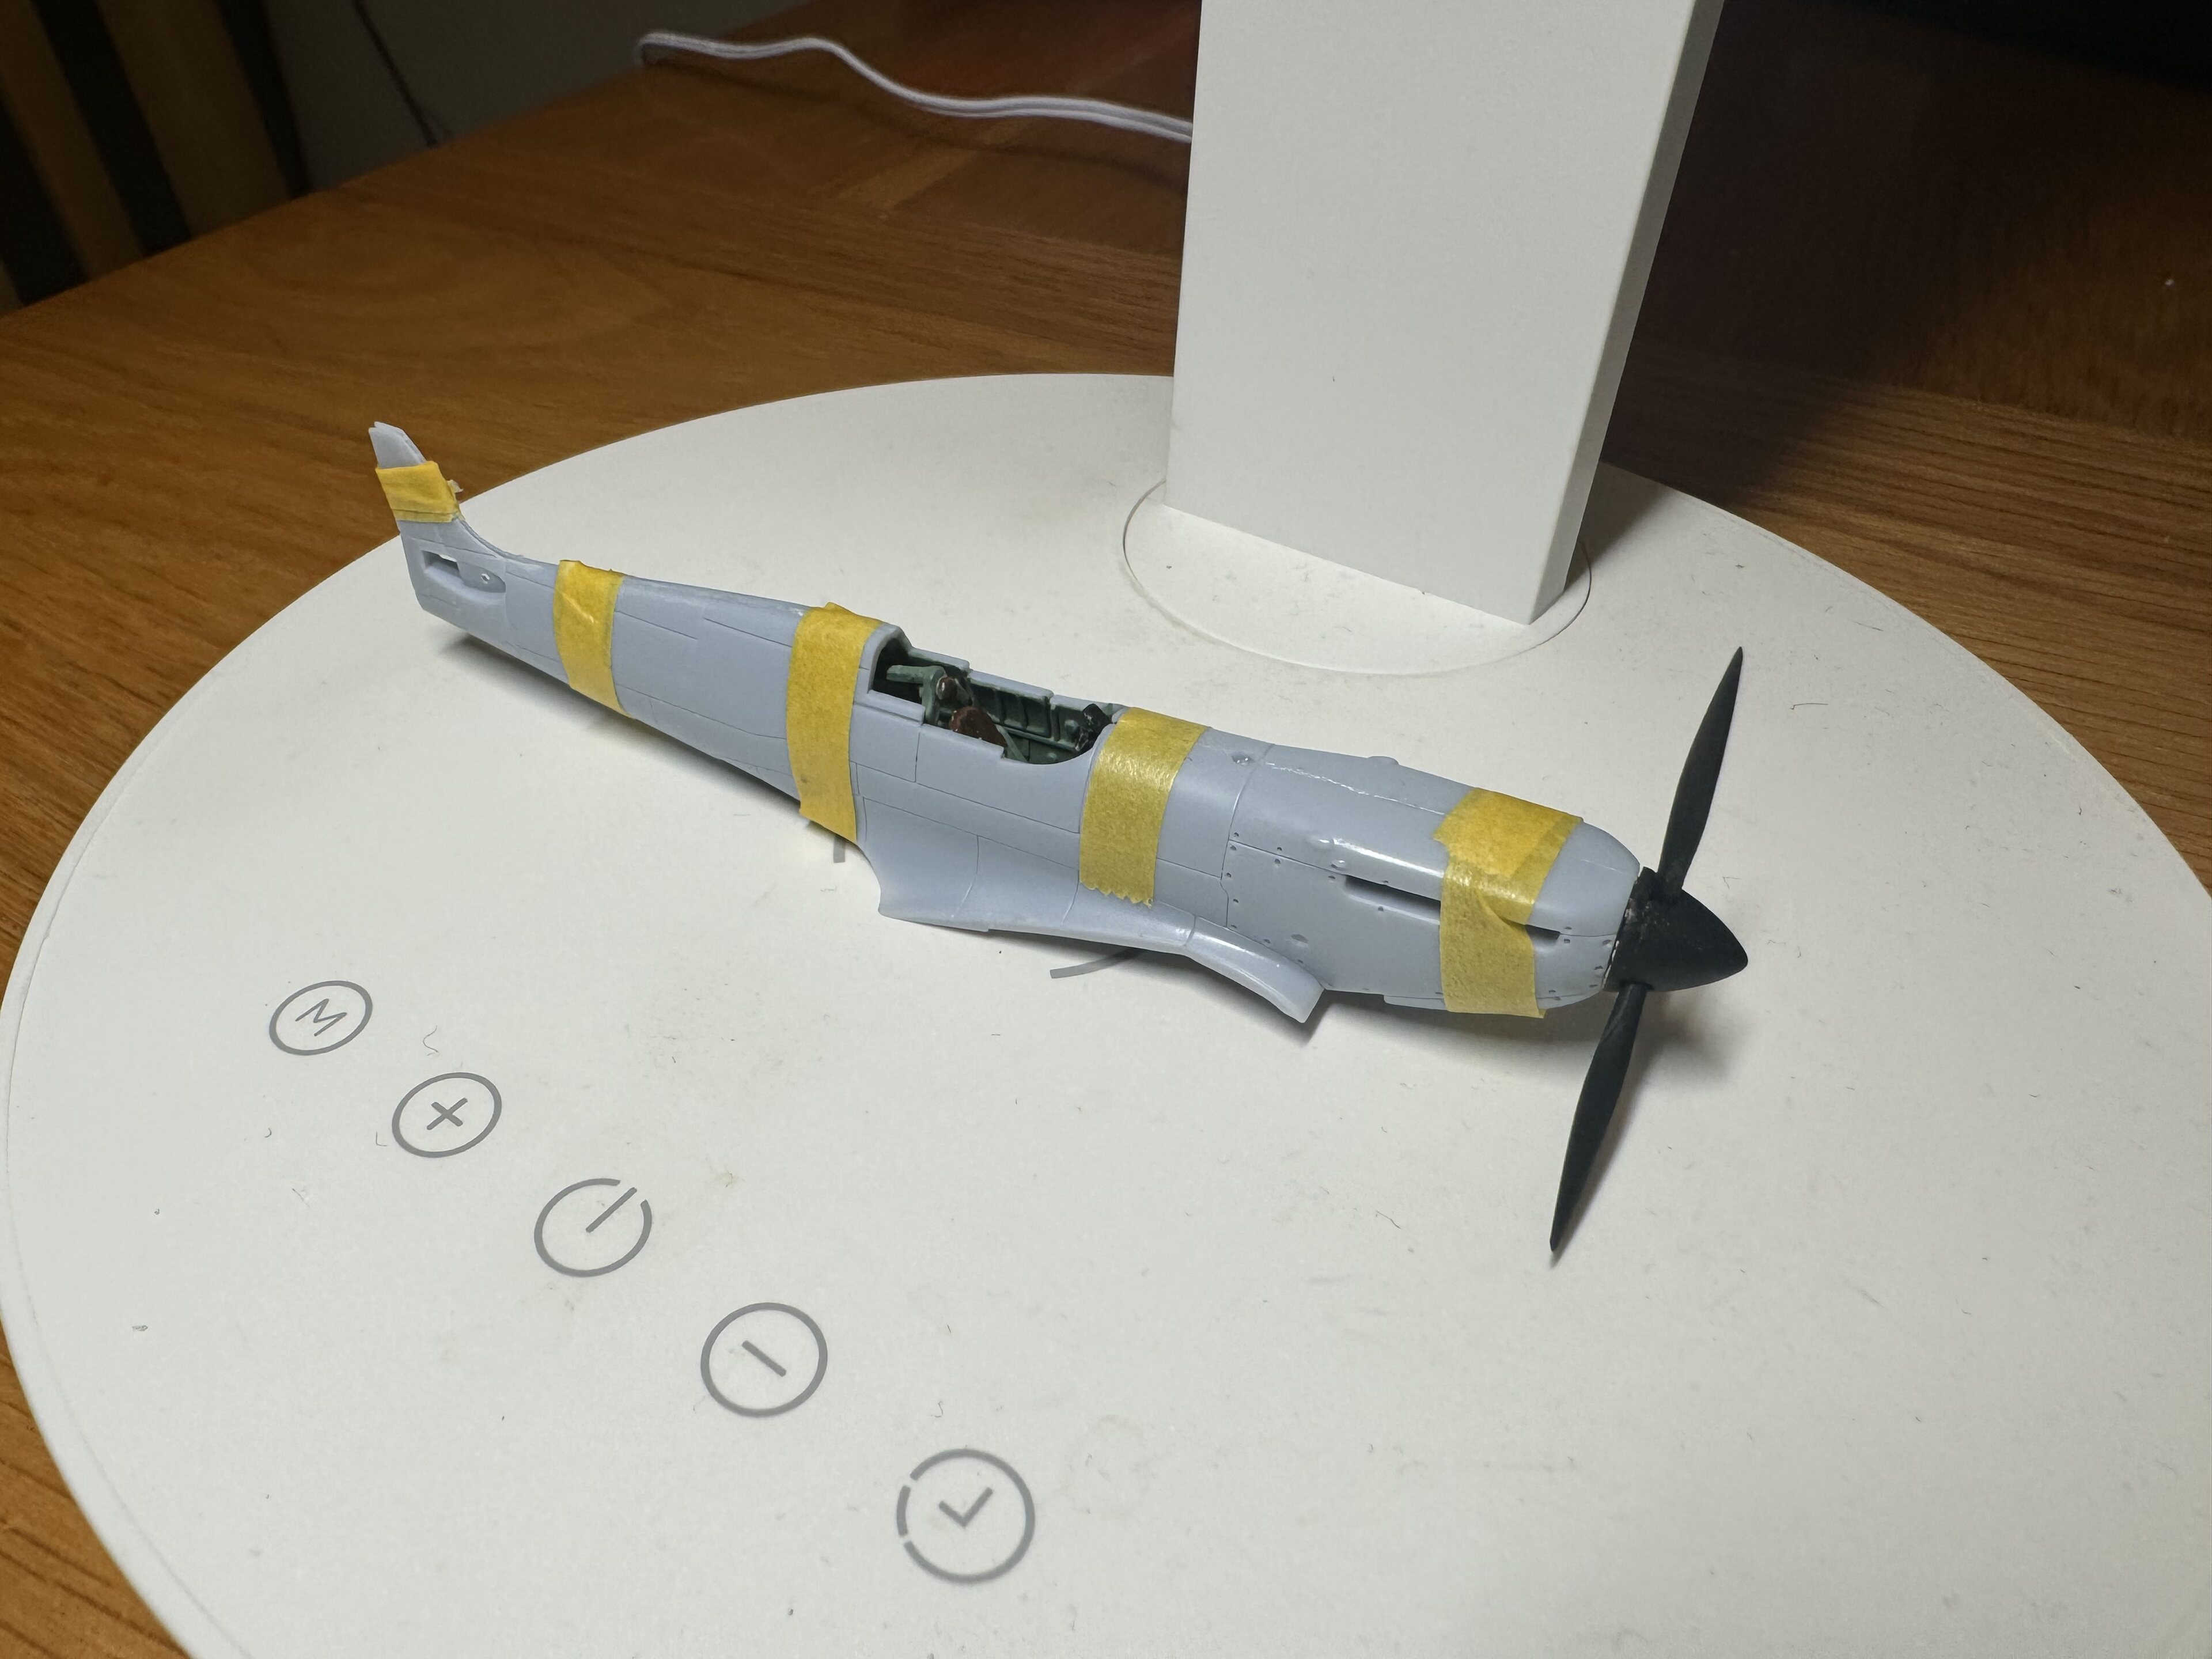 Pistonheads - This is a photograph of an intricately crafted model airplane displayed on a round, white stand. The plane is predominantly white with yellow markings and has a propeller on the front. It appears to be a representation of a fighter jet given its small size and stylized design. There are four buttons arranged in a circle beneath the stand, which might suggest interaction or control elements. In the background, there's a glimpse of a wooden table and a partially visible object that resembles a toy car. The overall scene suggests a hobbyist setup for displaying and possibly controlling these models.